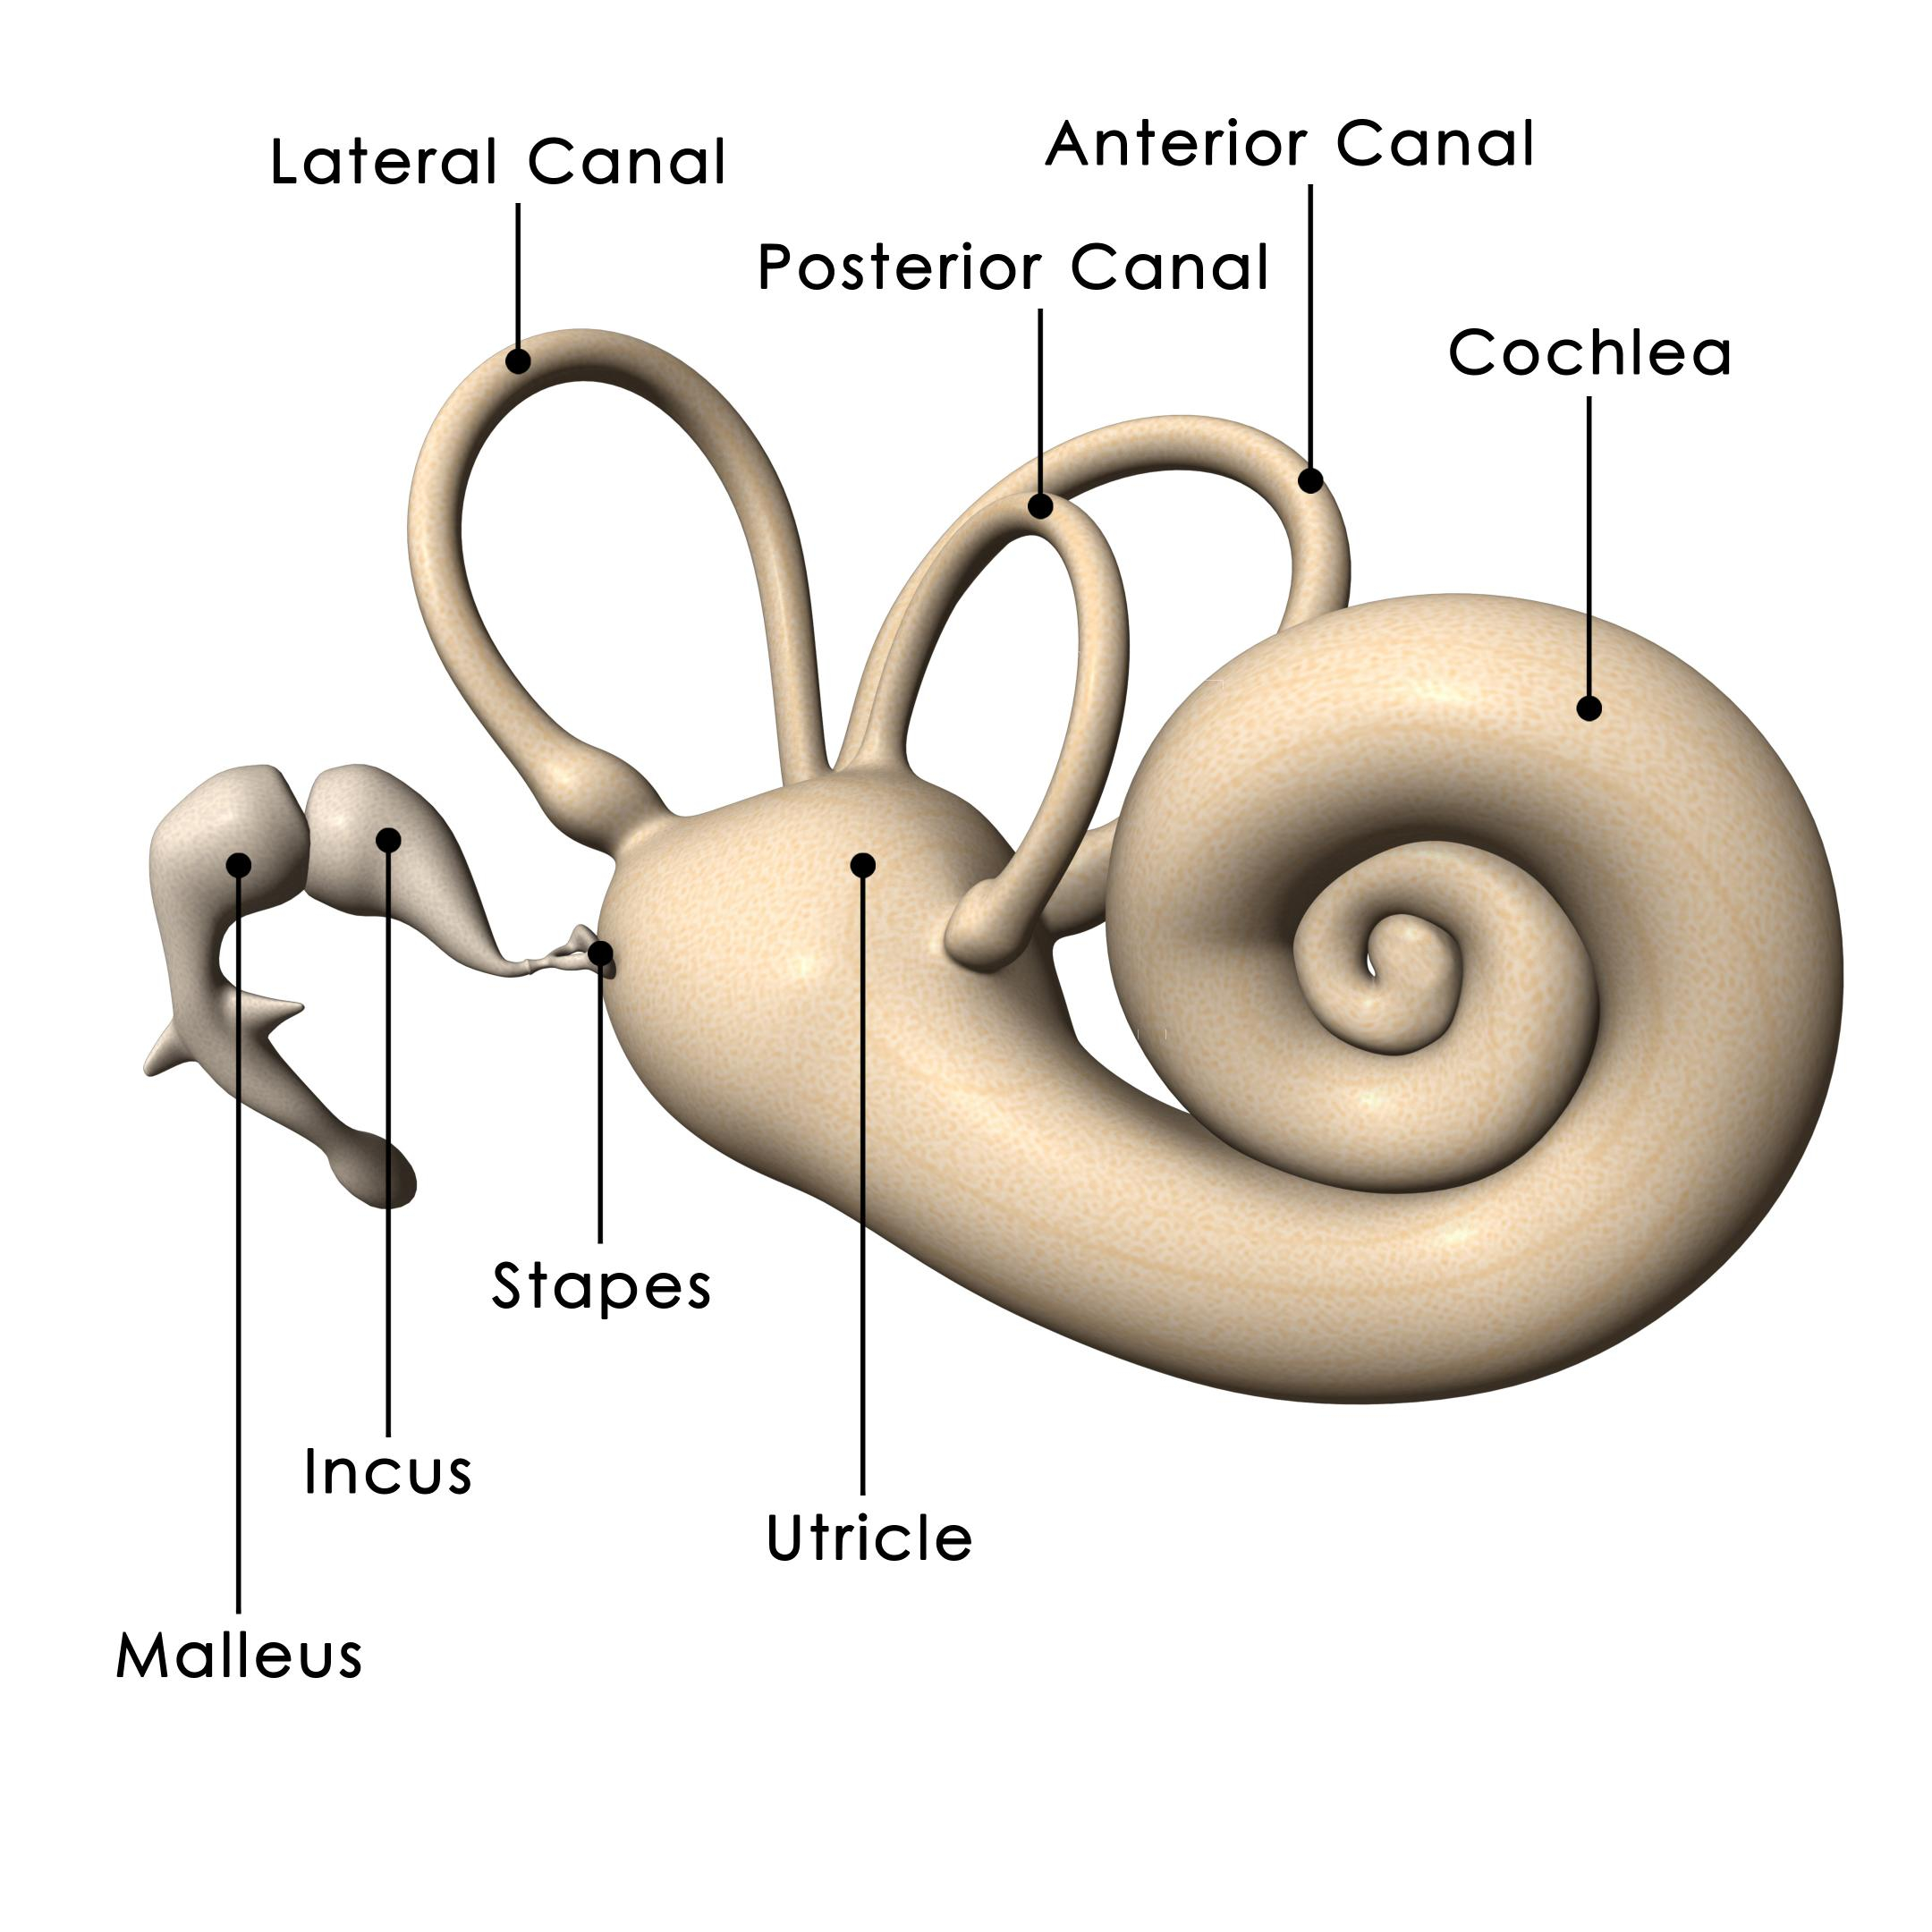 Diagram Of Ear Ears And Hearing How Do They Work